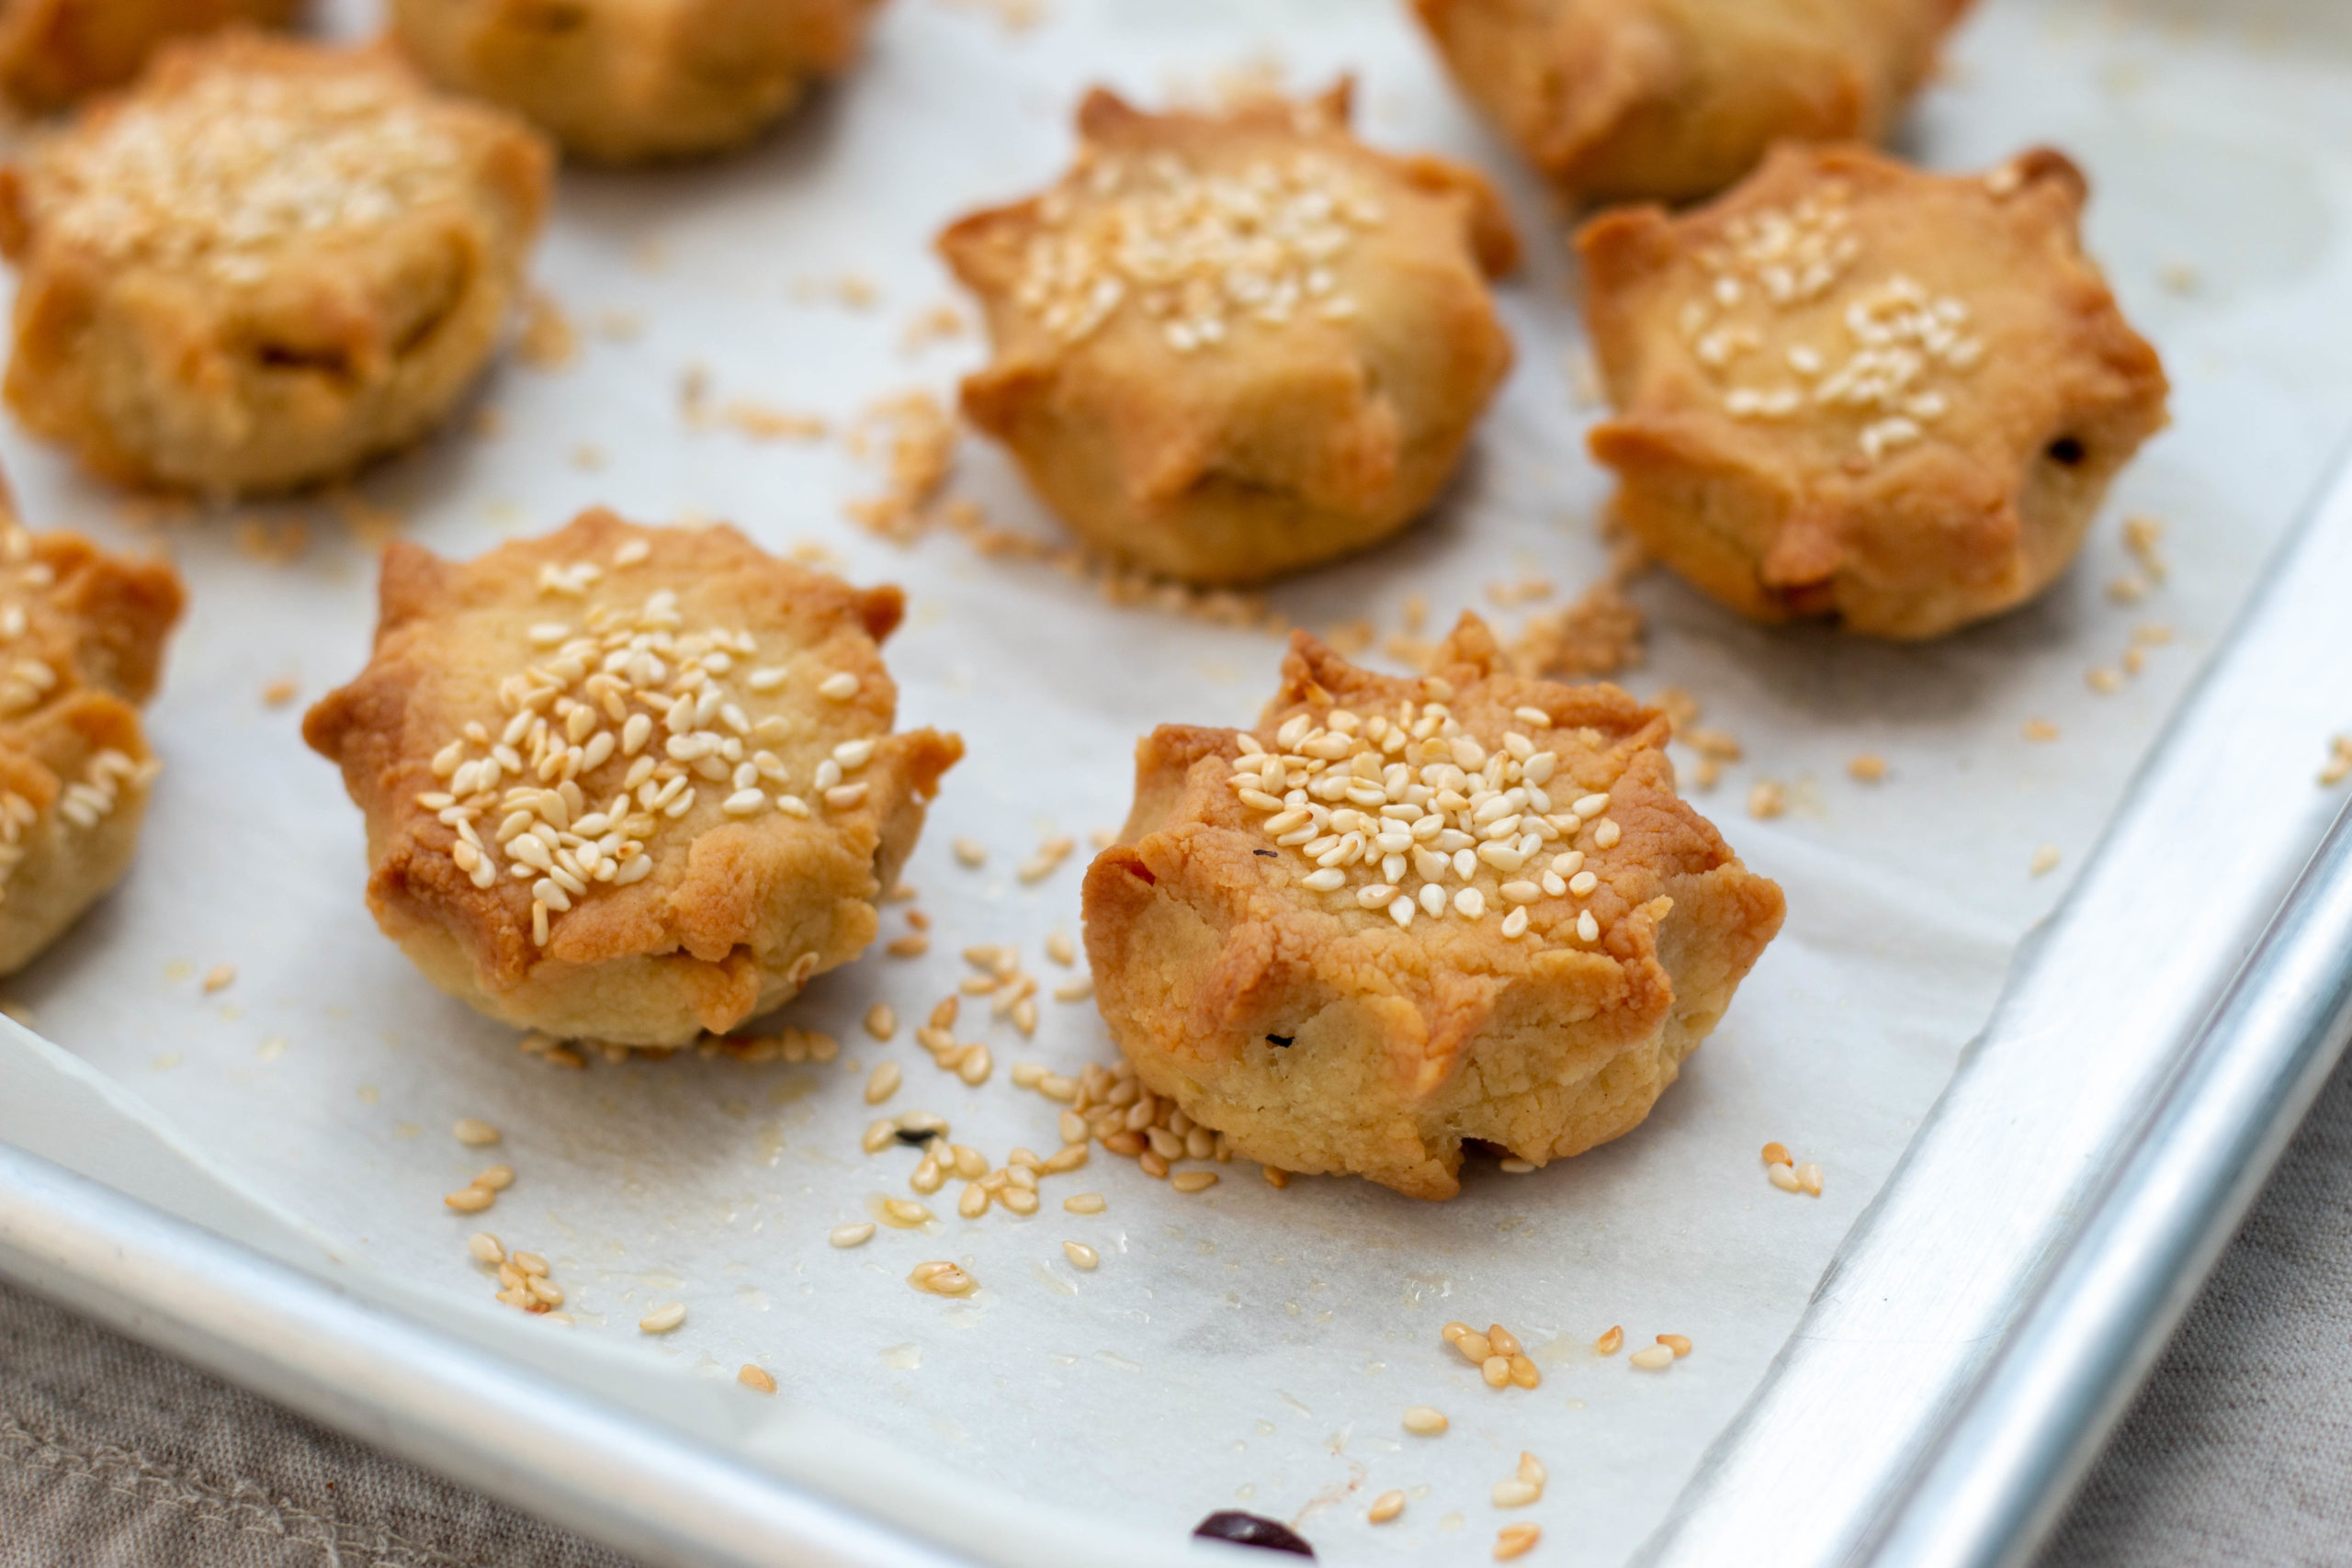 Small savory pastries called pastelicos topped with sesame seeds on a piece of parchment paper